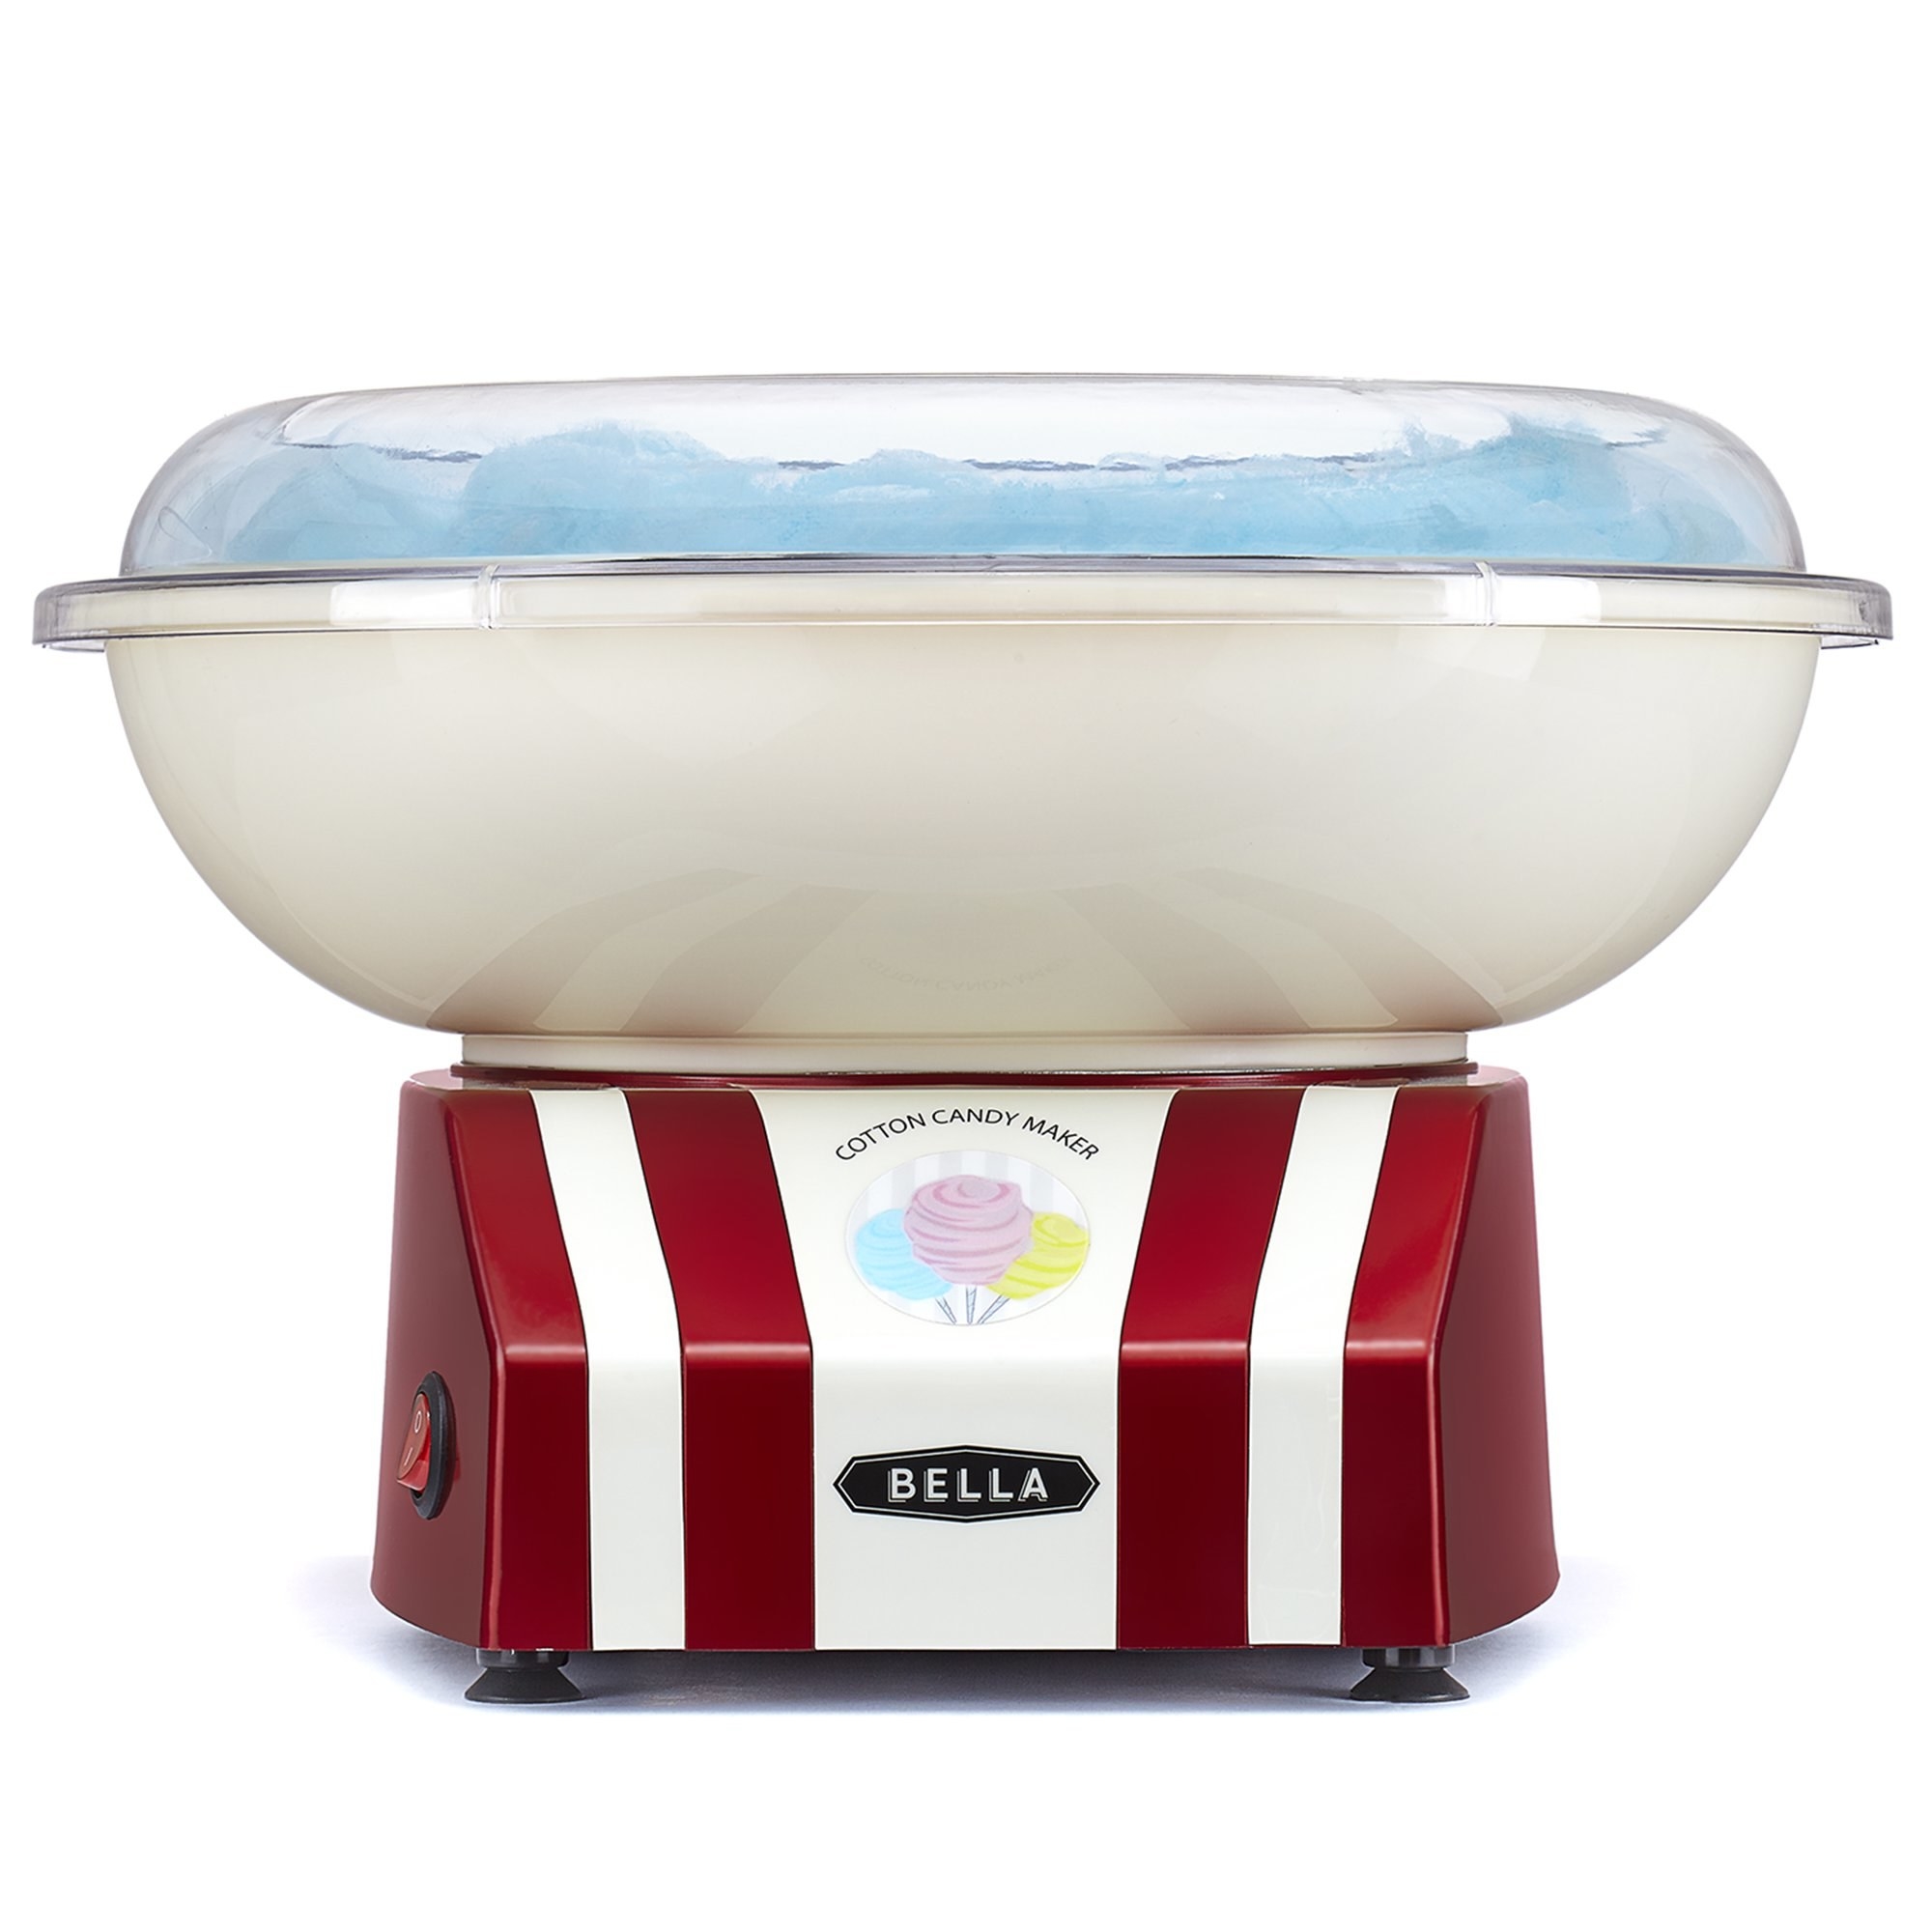 A striped cotton candy maker with light blue cotton candy inside